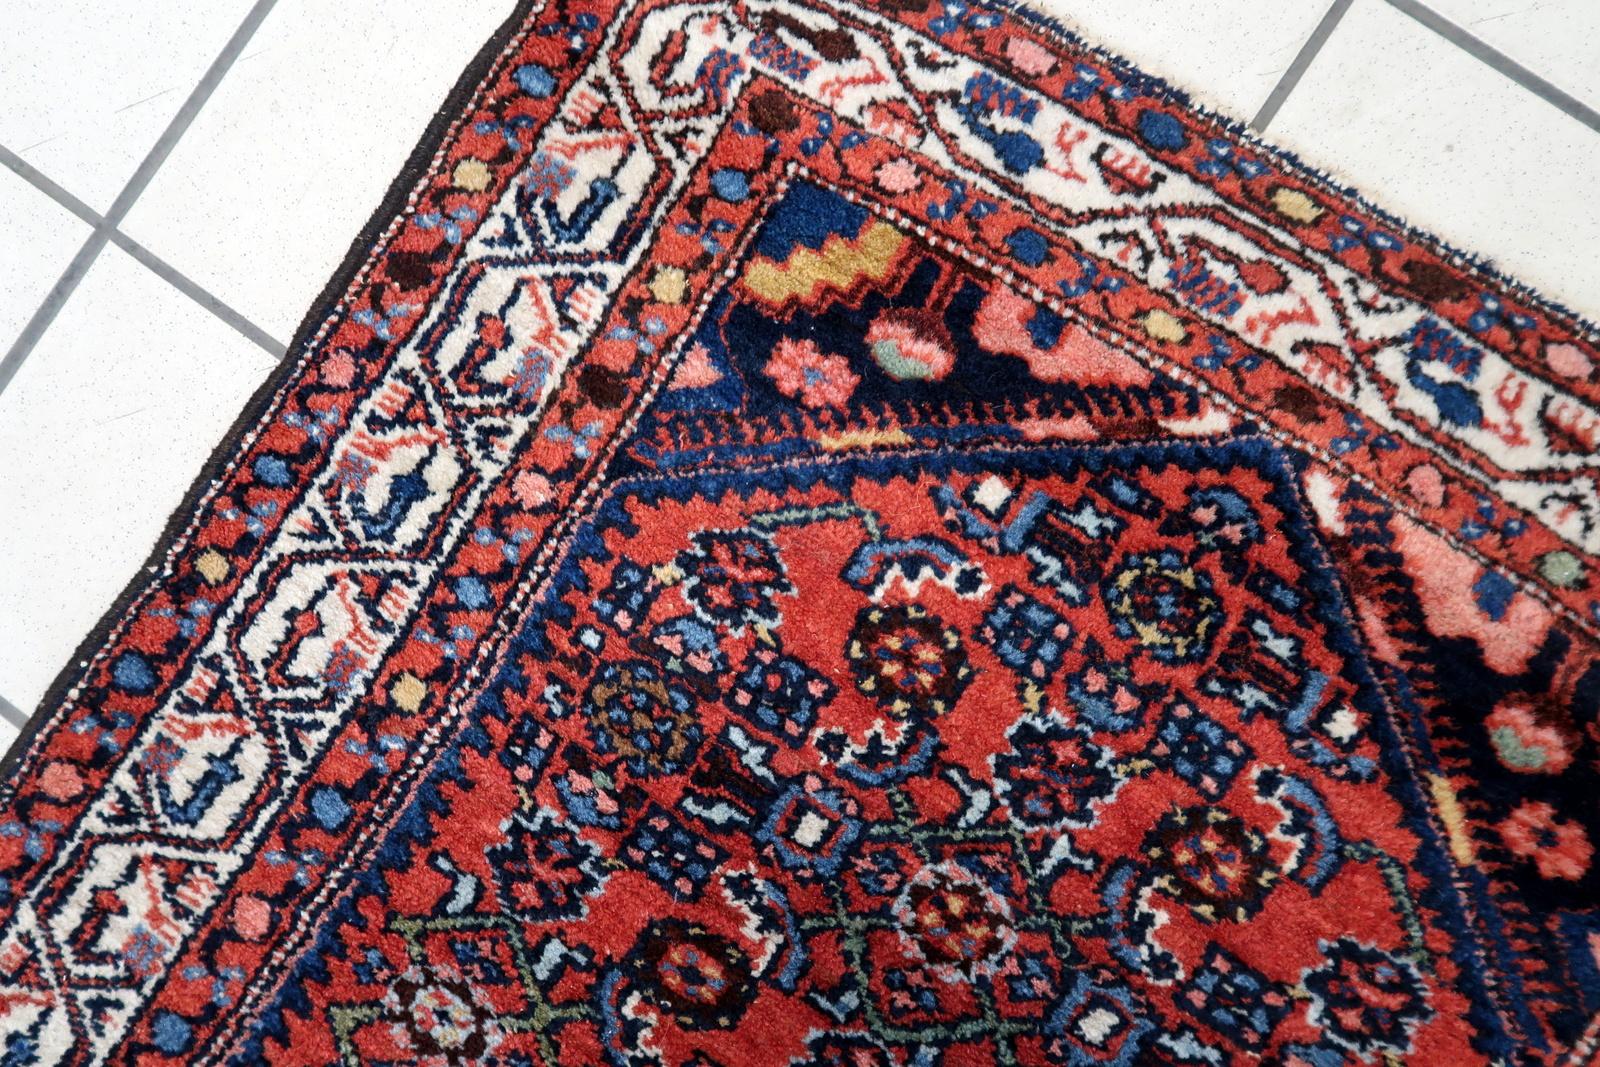 Hand-Knotted Handmade Vintage Persian Style Hamadan Rug 2.4' x 4.1', 1970s - 1C1122 For Sale